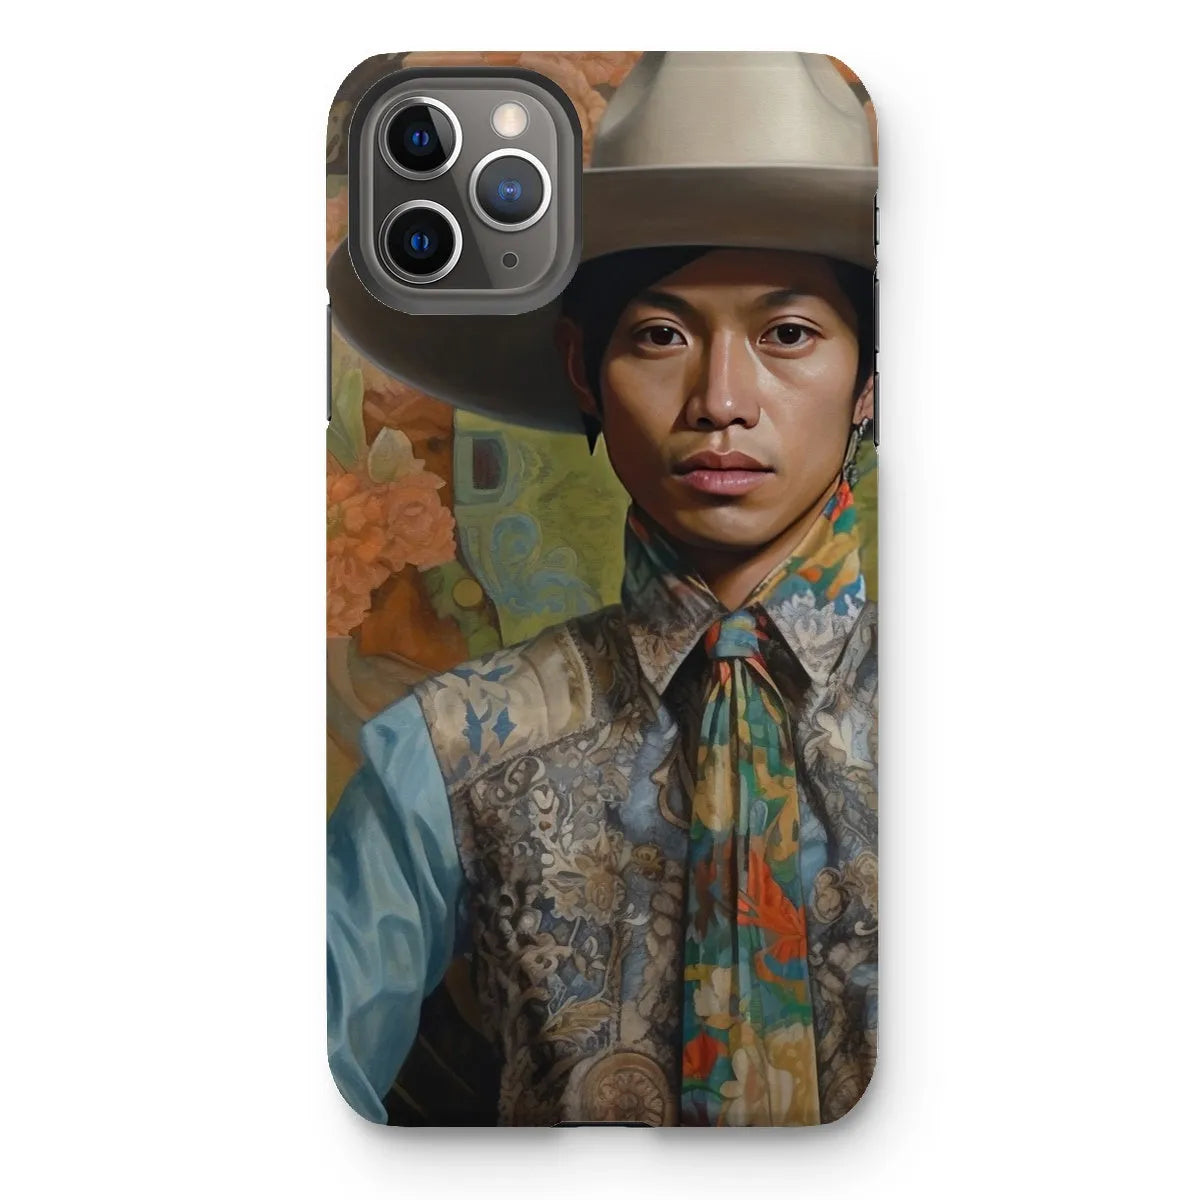 Junada The Gay Cowboy - Dandy Gay Aesthetic Art Phone Case - Iphone 11 Pro Max / Matte - Mobile Phone Cases - Aesthetic